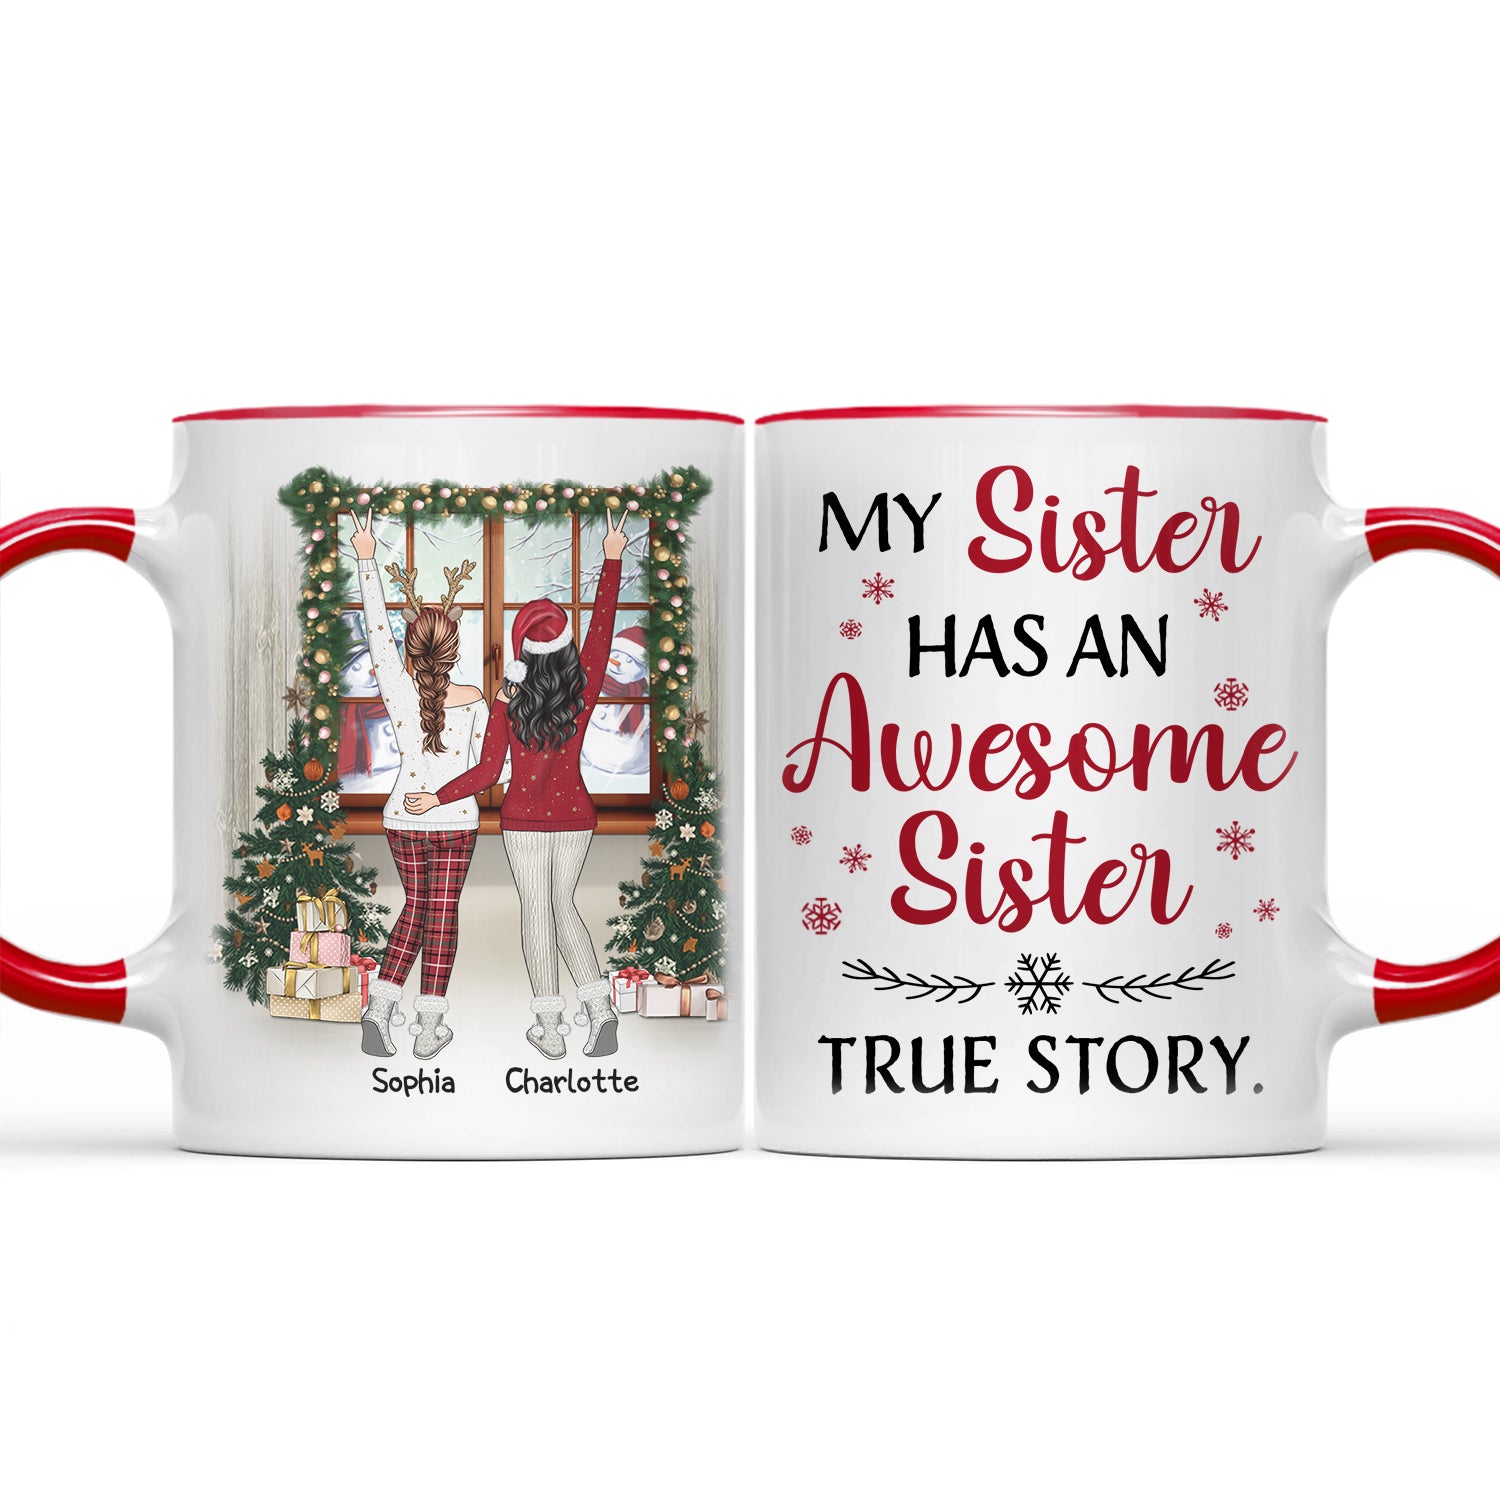 My Sister Has An Awesome Sister True Story - Christmas Gift For Girl, Bestie, Family - Personalized Accent Mug